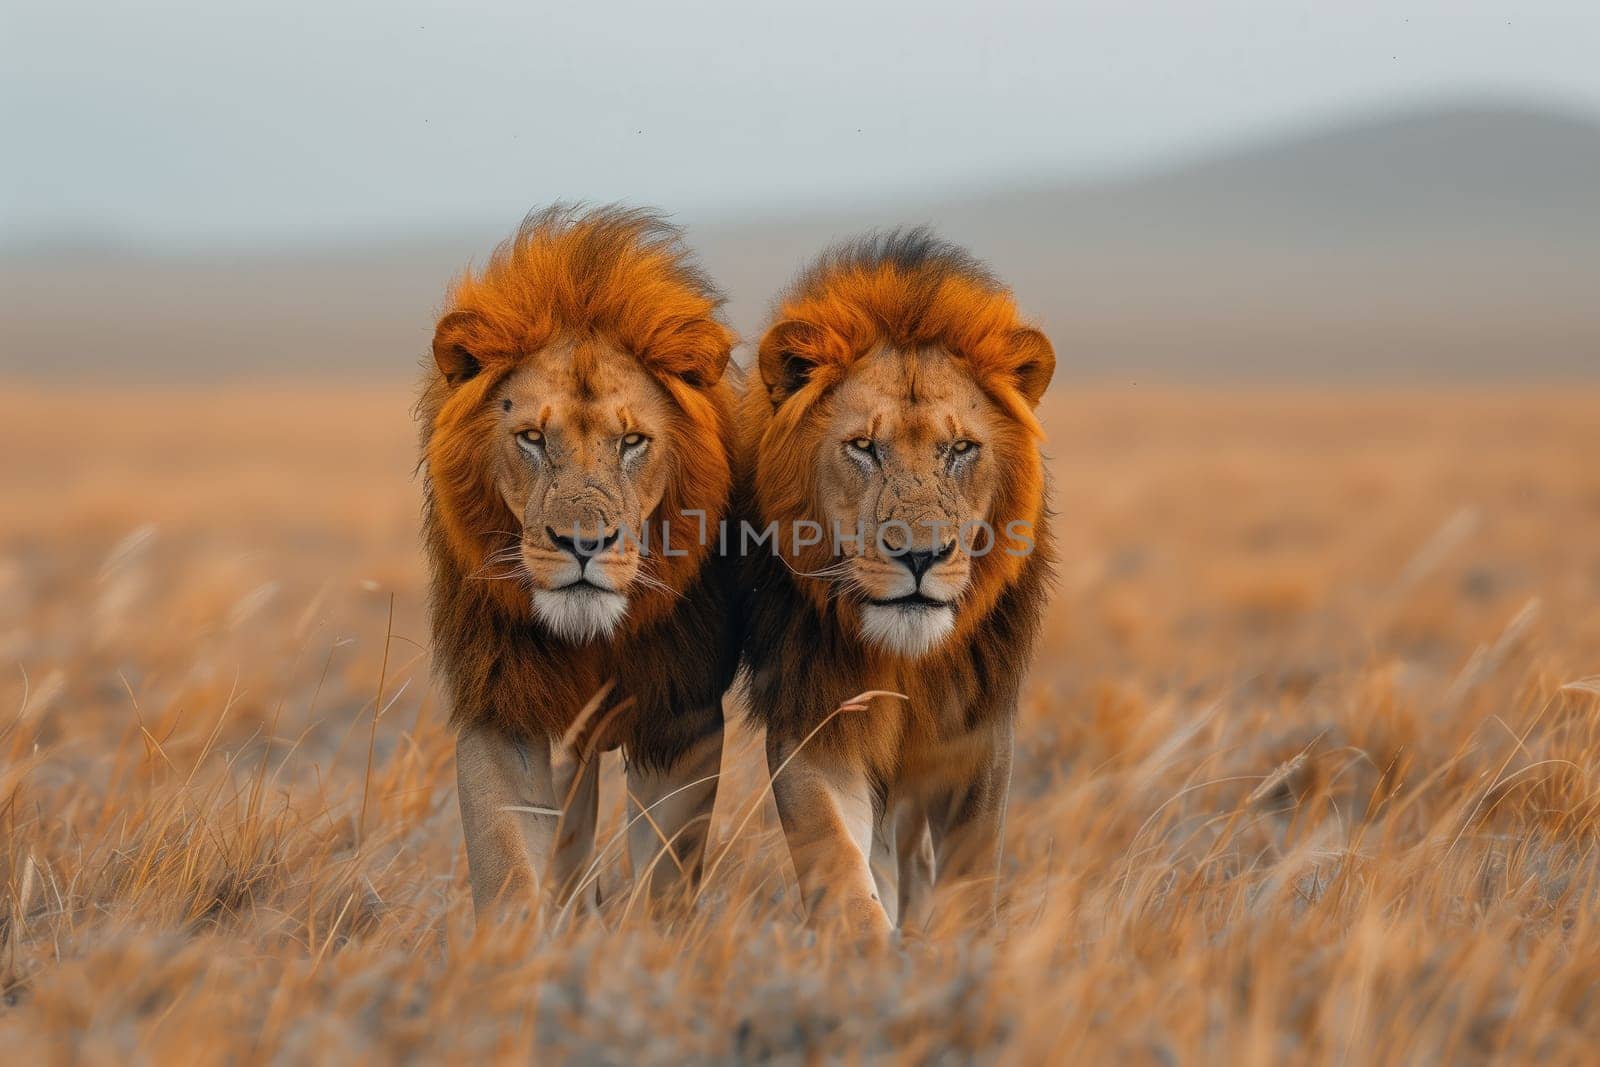 Two Felidae carnivores, big cats known as lions, standing together in a grassy field within a natural landscape ecoregion. The terrestrial animals are surrounded by grassland and plains